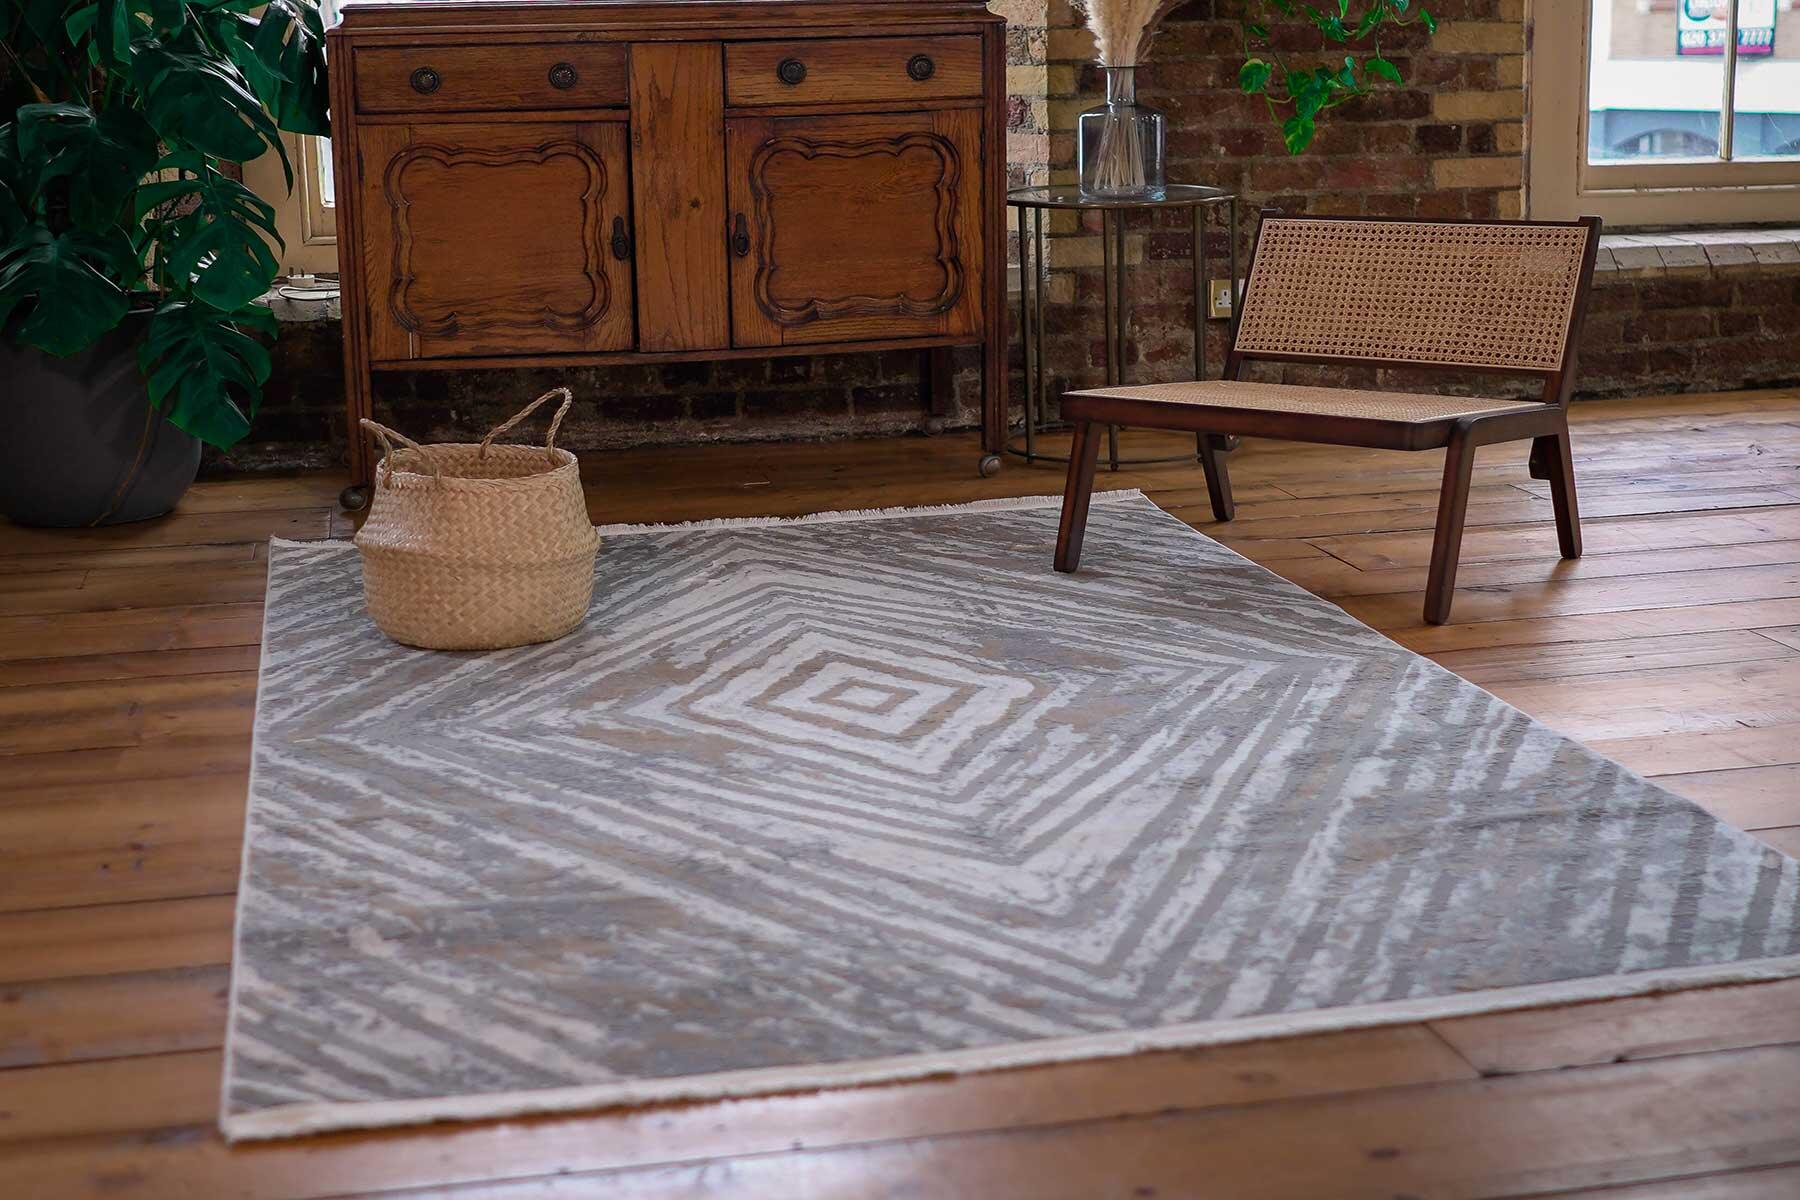 washable rugs material: Durability and cleaning